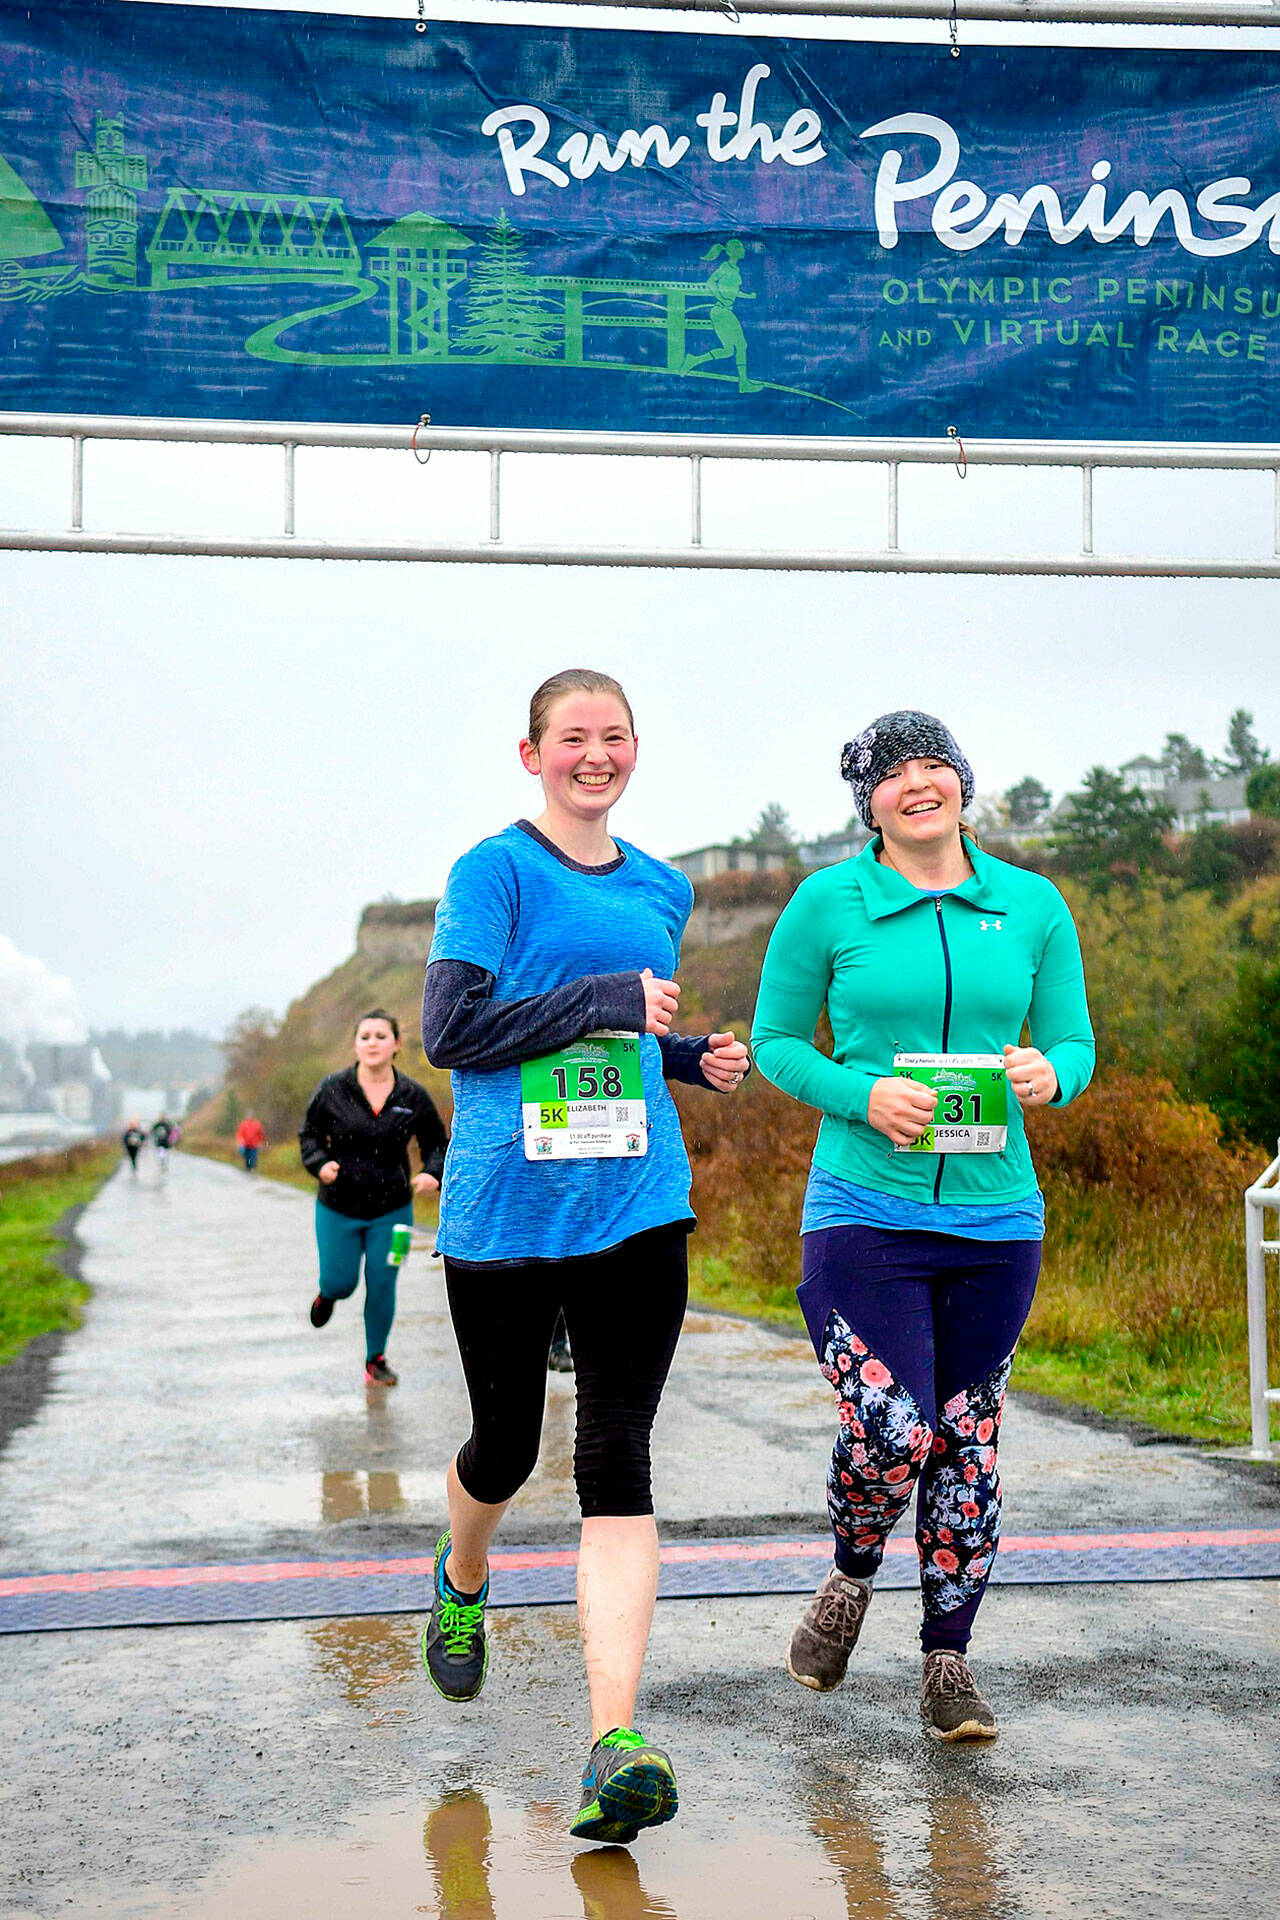 Elizabeth Hammel, left and Jessica Rohr, right cross the finish like at the Larry Scott Trail Run in 2019, the last year the event was run live.